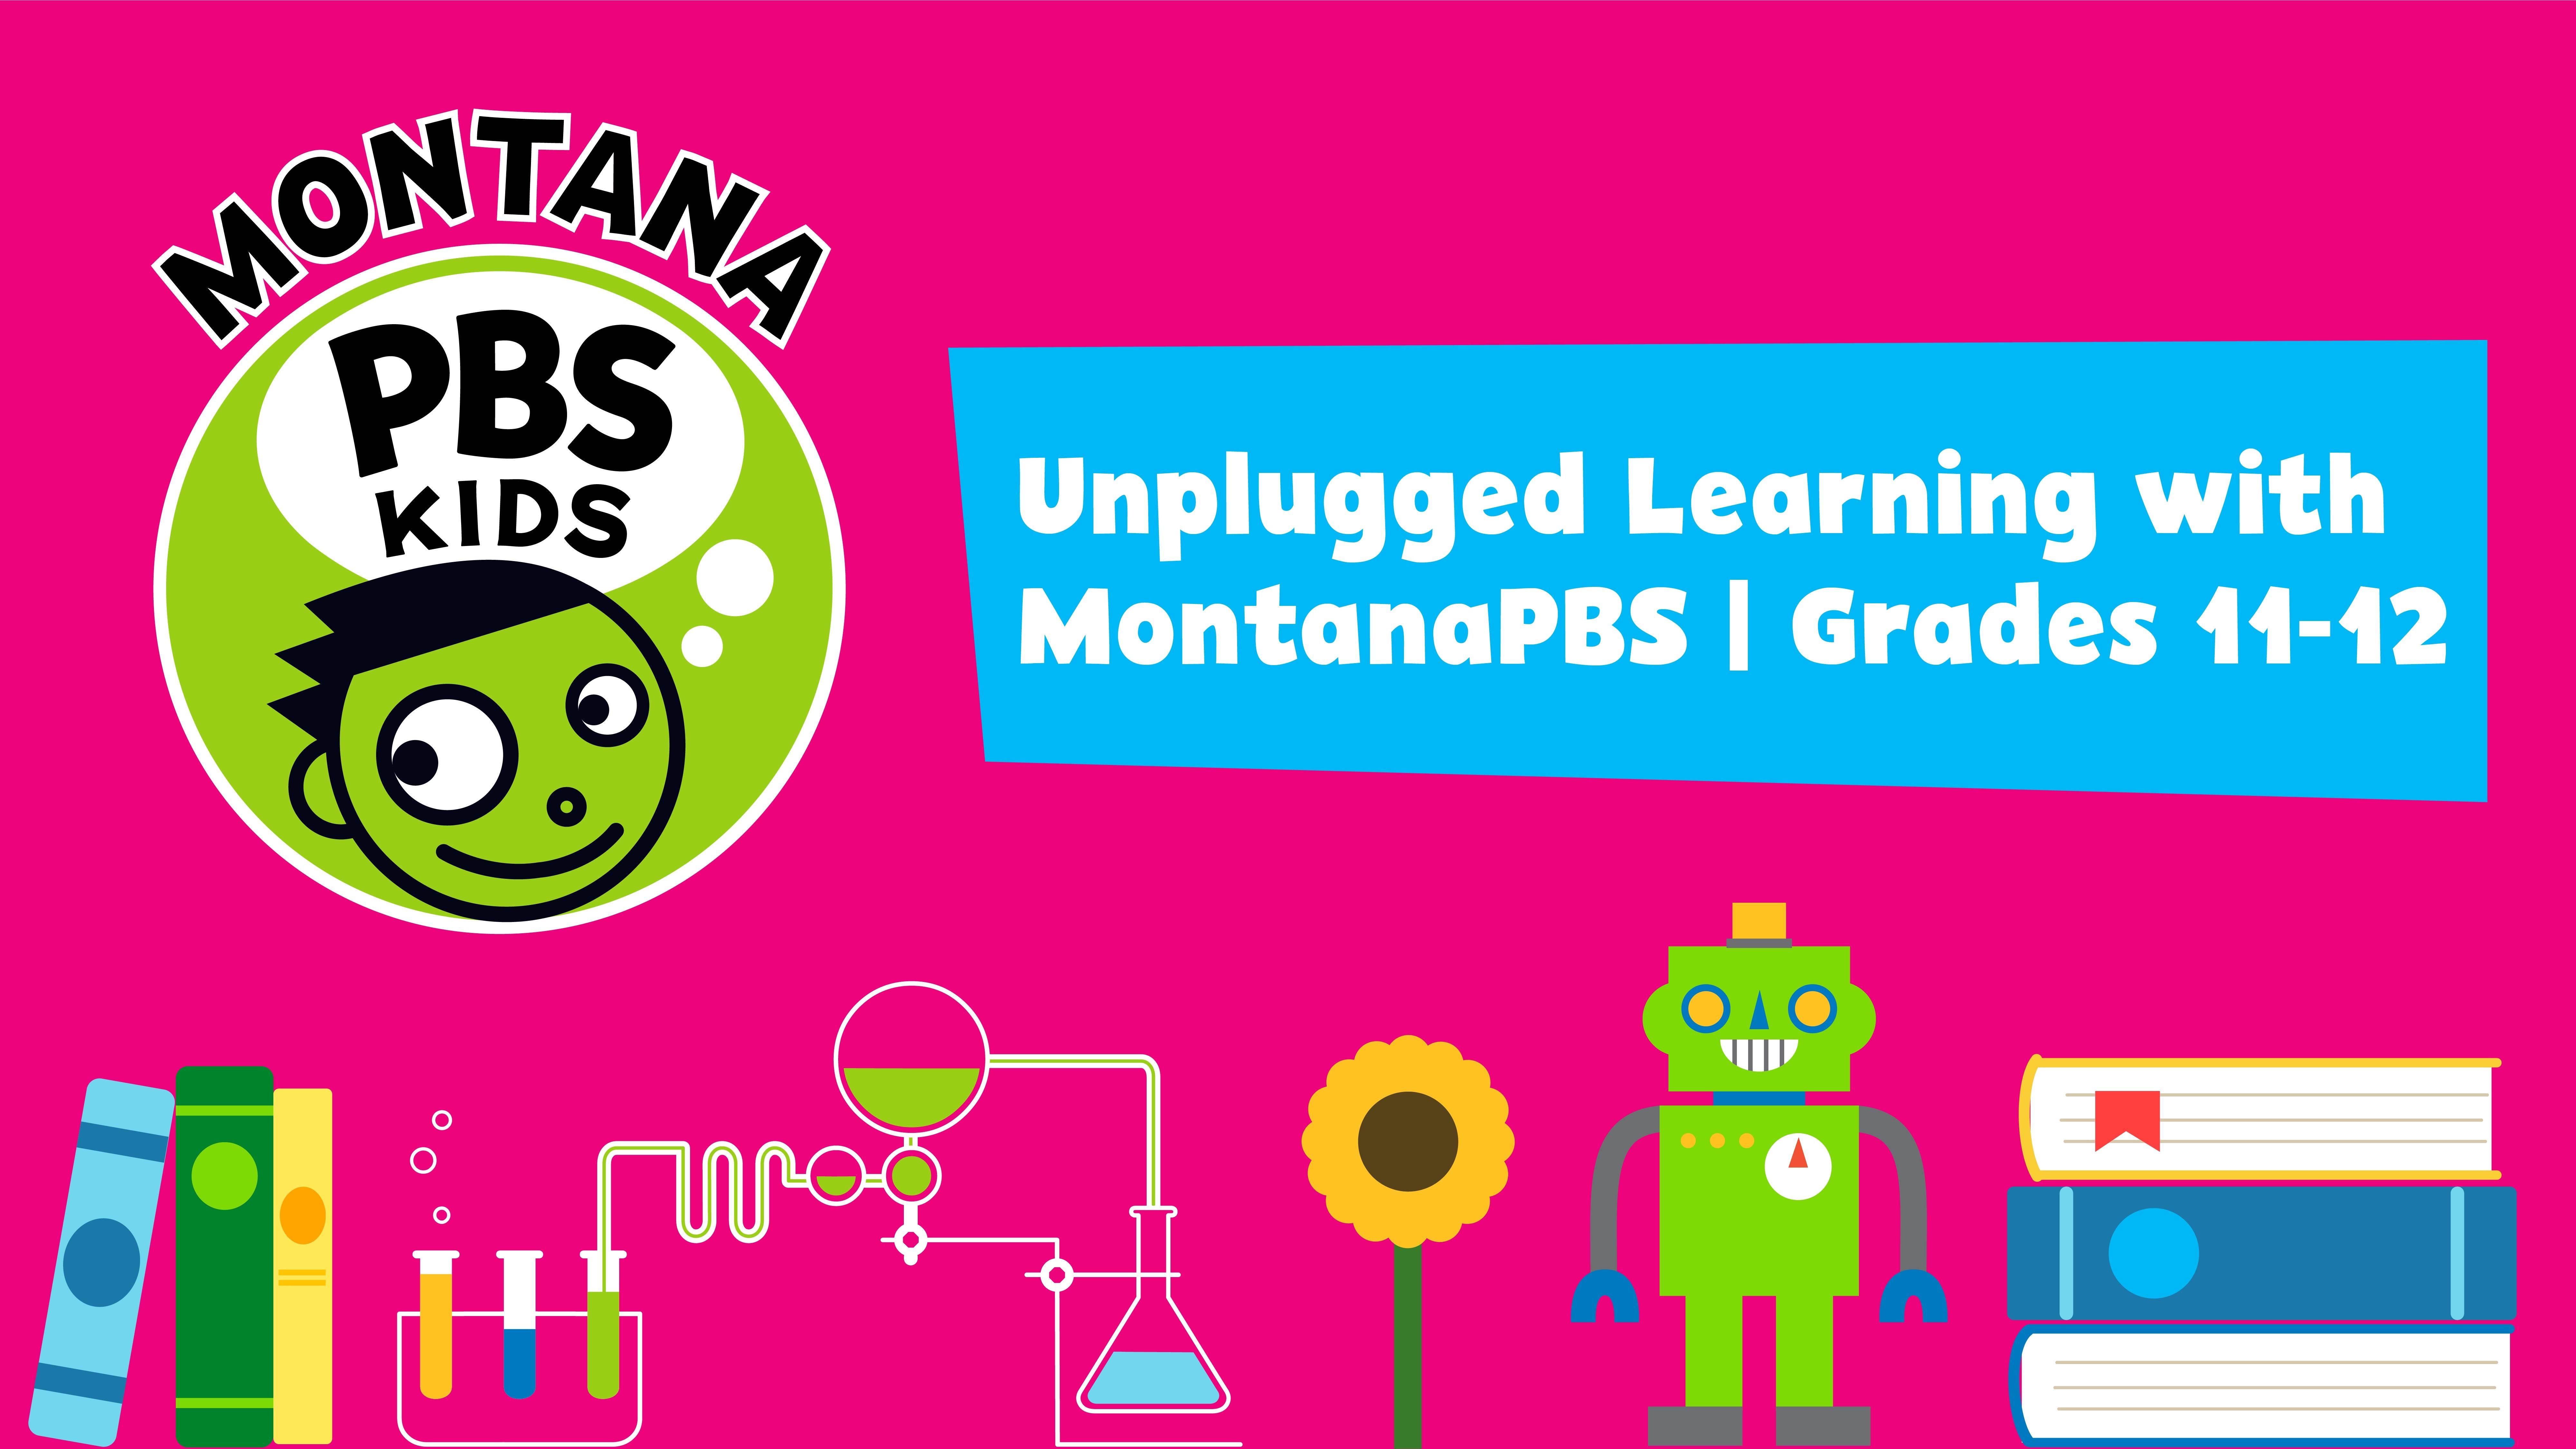 Unplugged Learning with MontanaPBS Grades 11-12